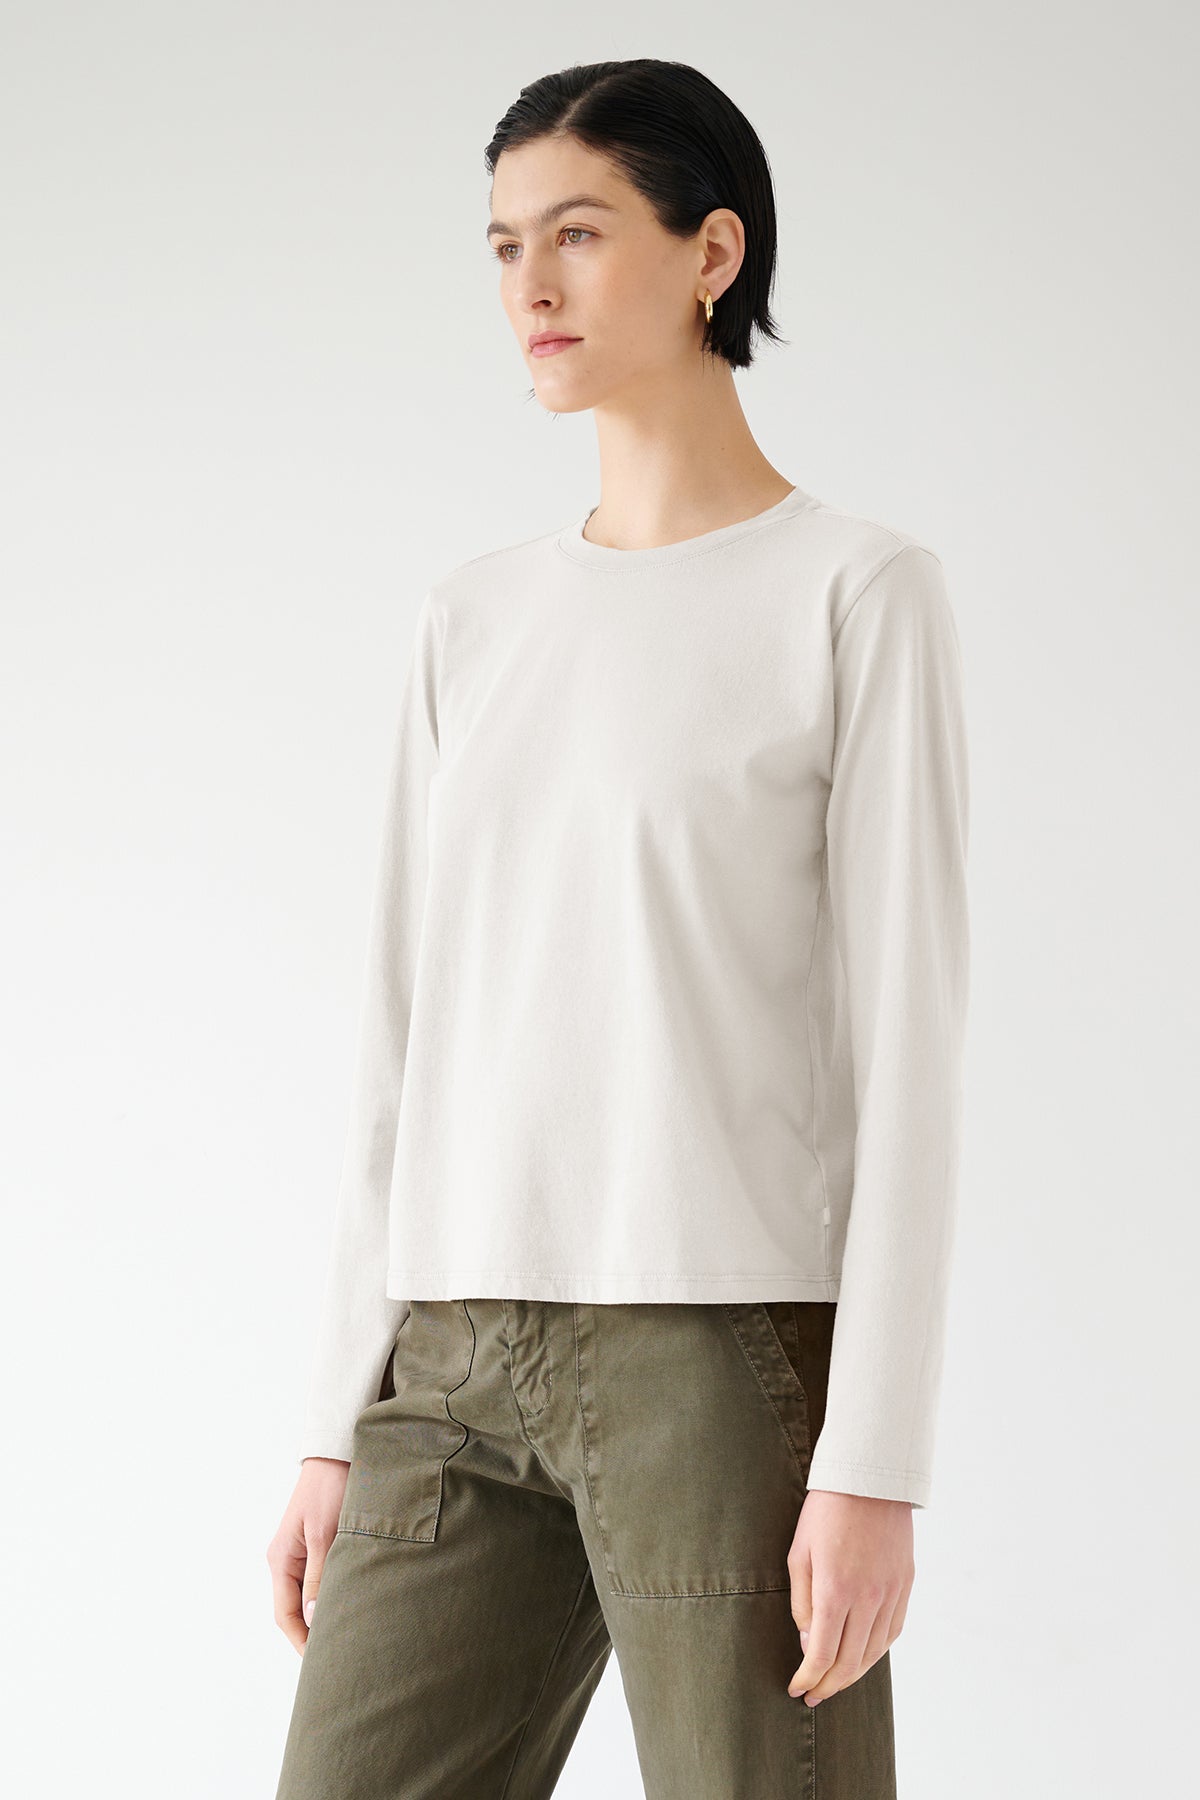 Woman in a Velvet by Jenny Graham VICENTE TEE and green pants standing against a light background.-36503793565889